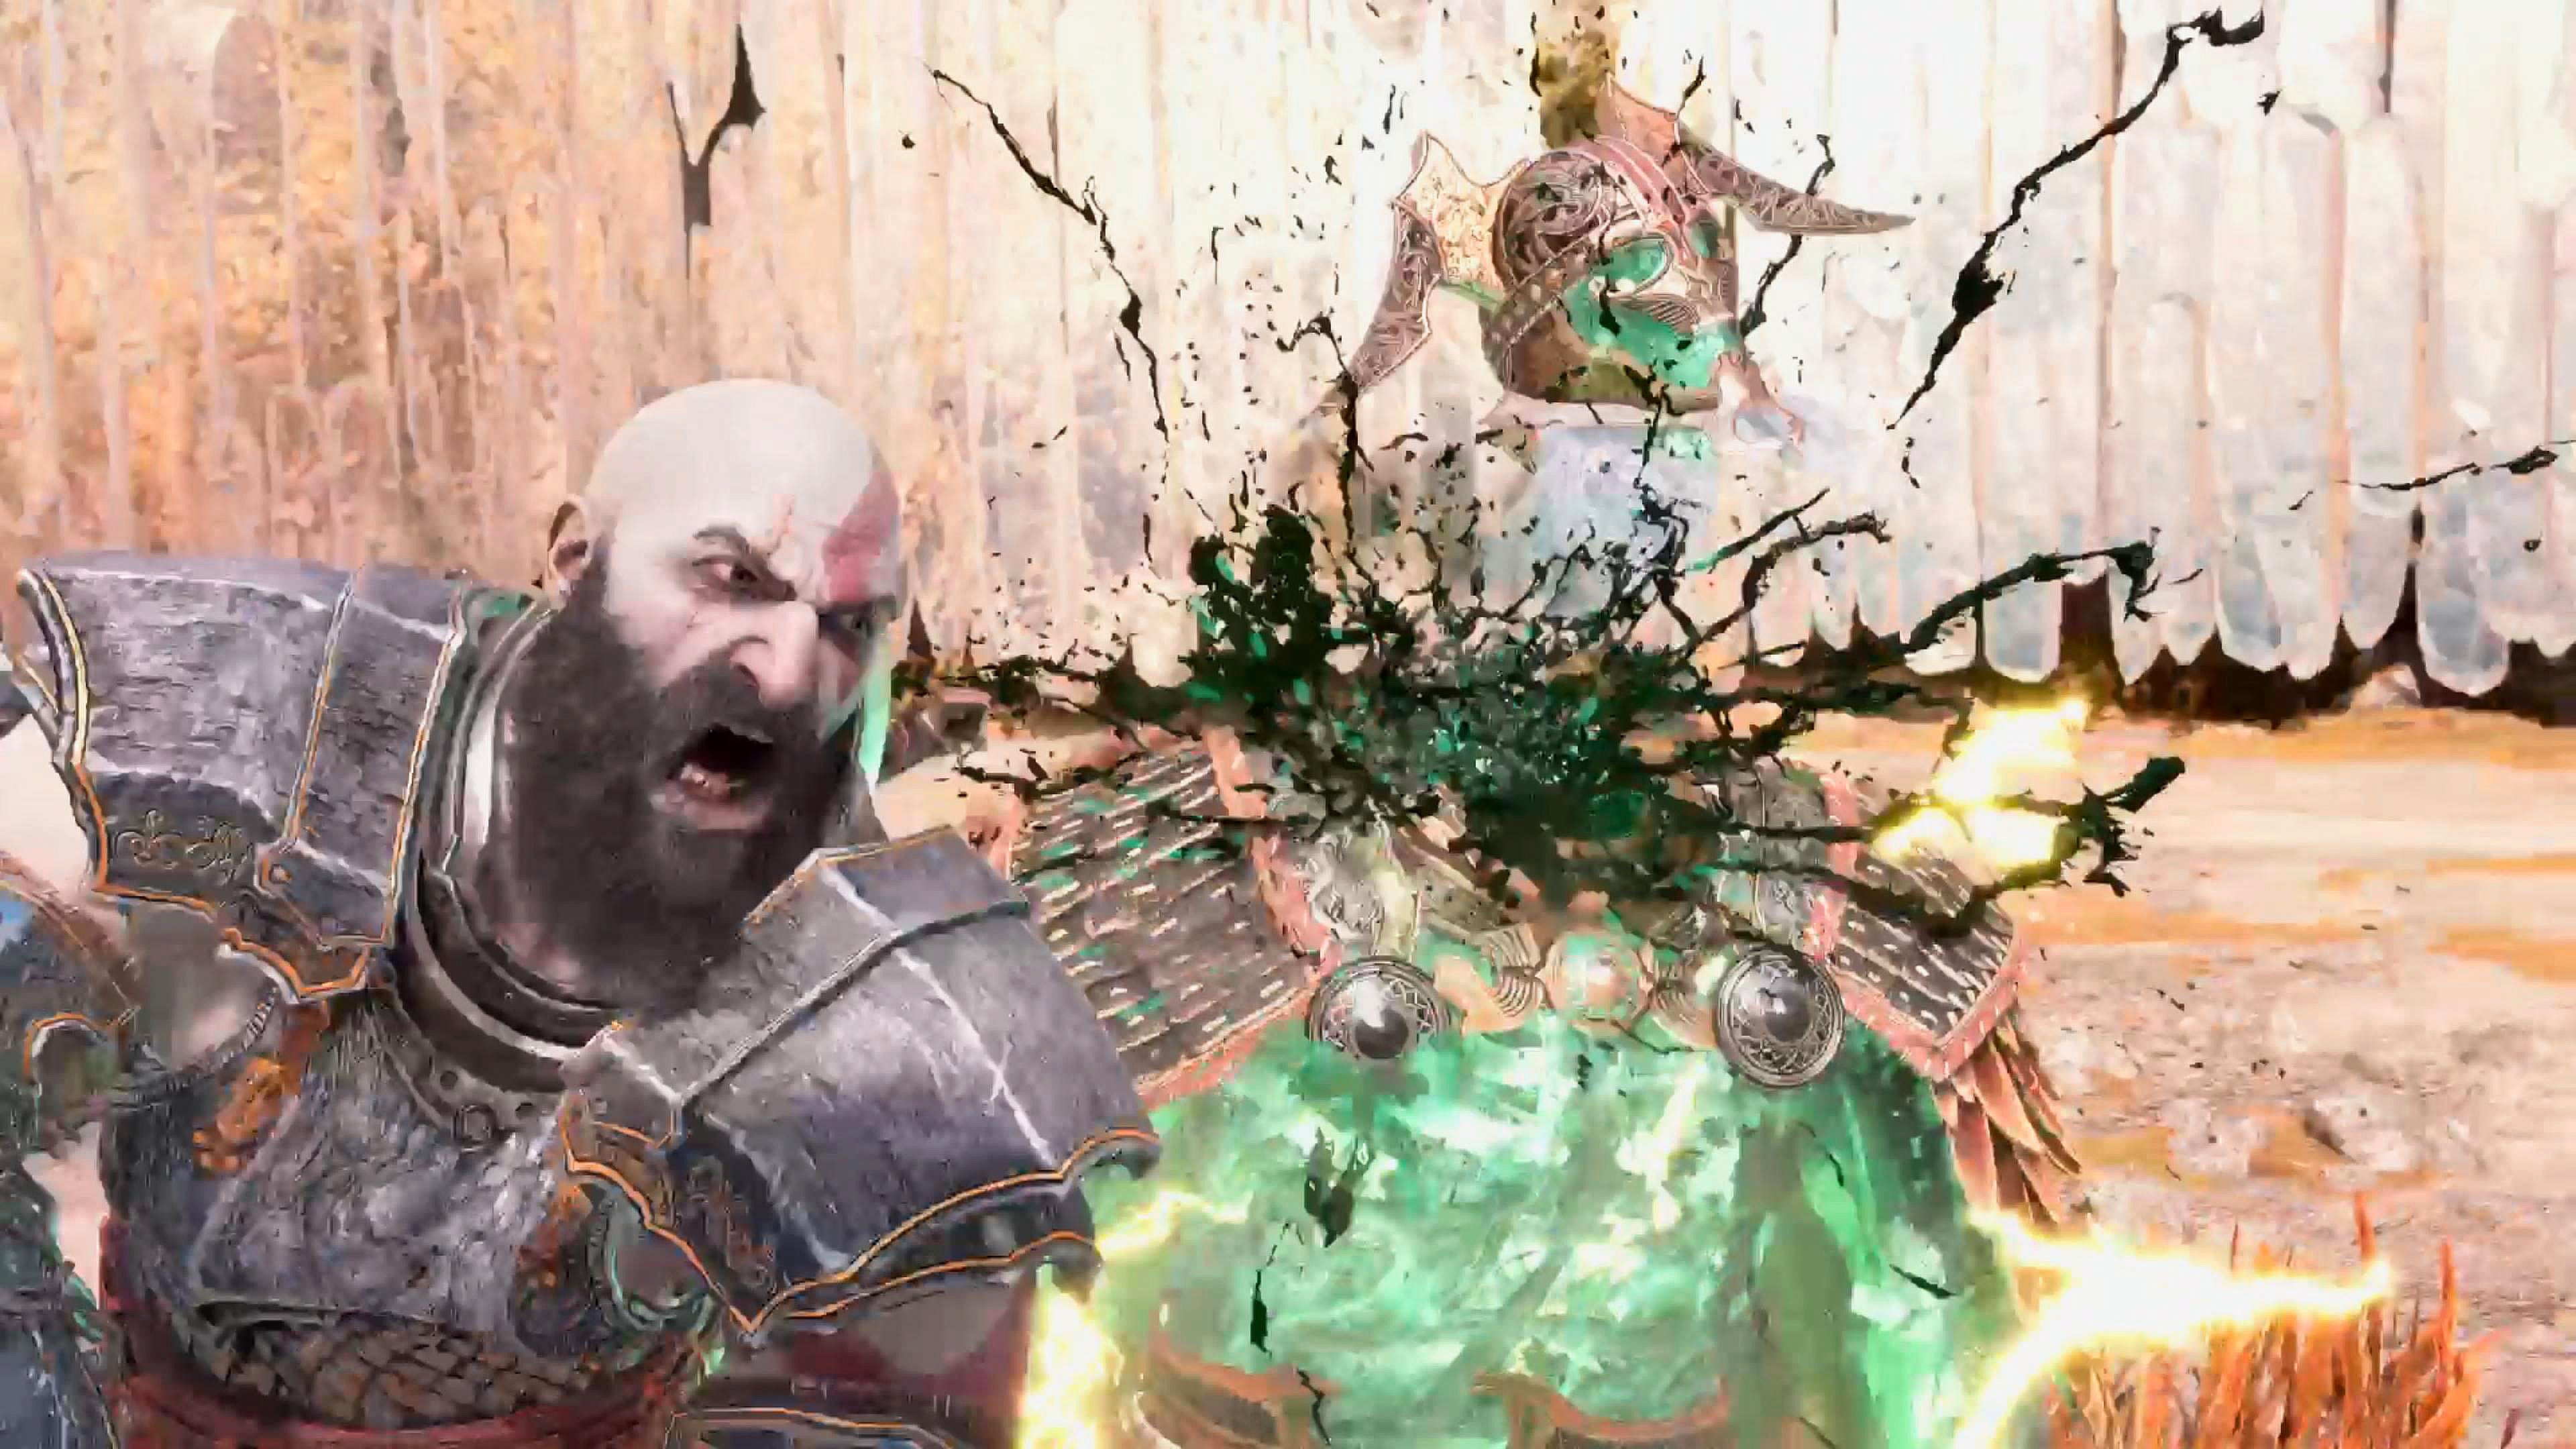 When Beigadr's health is depleted, finish him off the only way Kratos knows how.